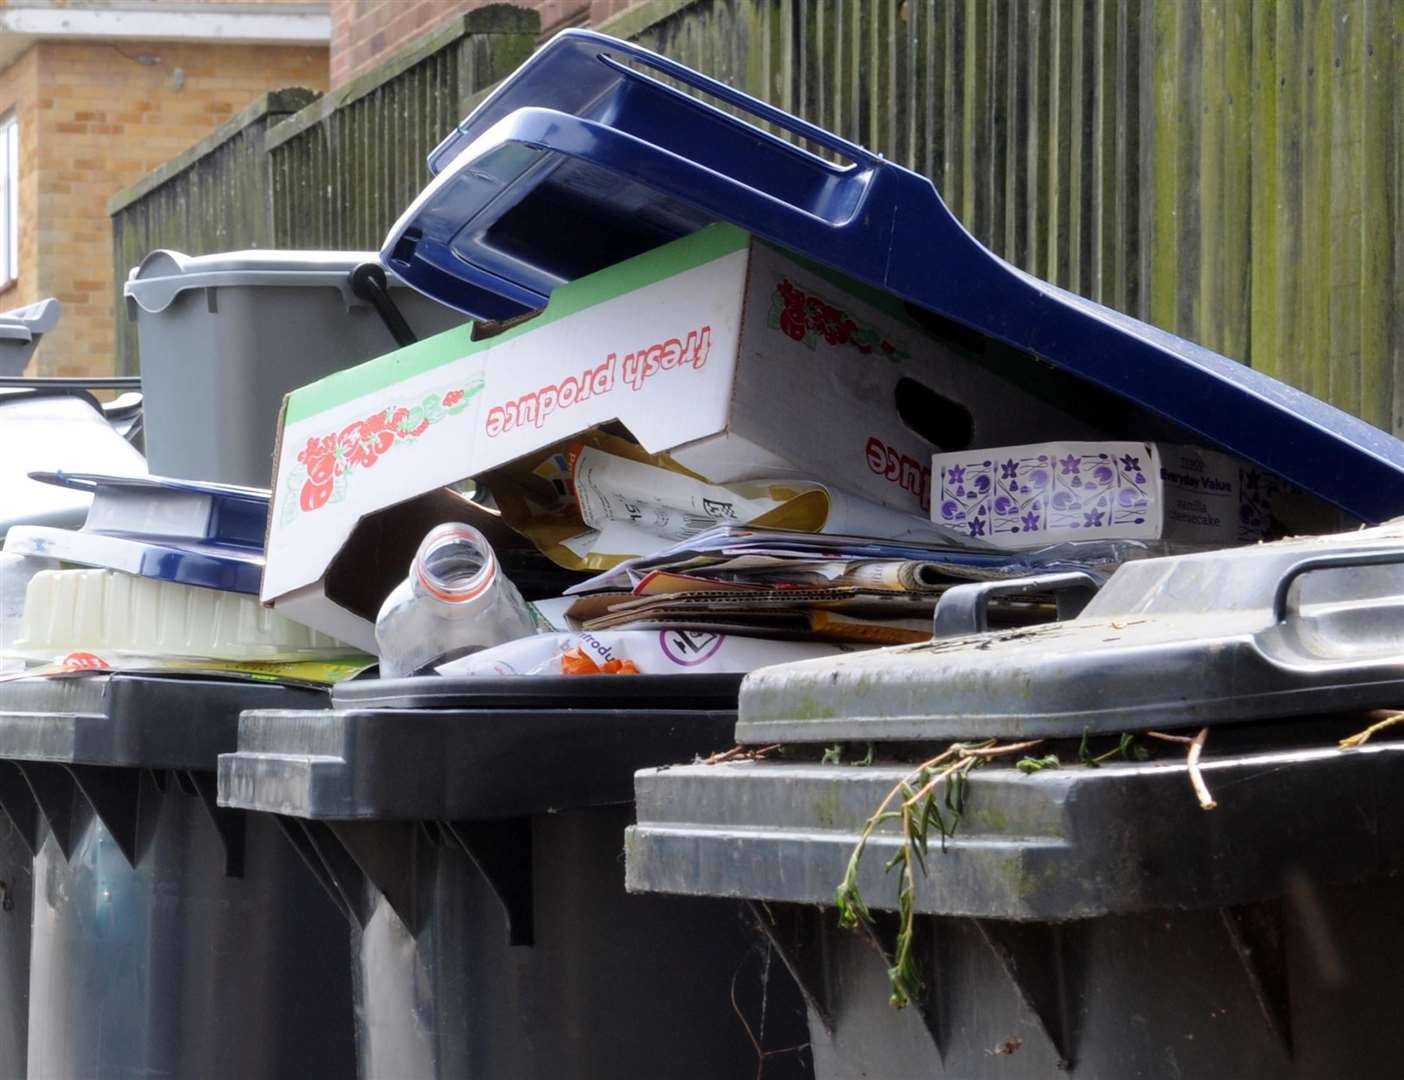 Recycling waste has piled up as blue bins have gone uncollected